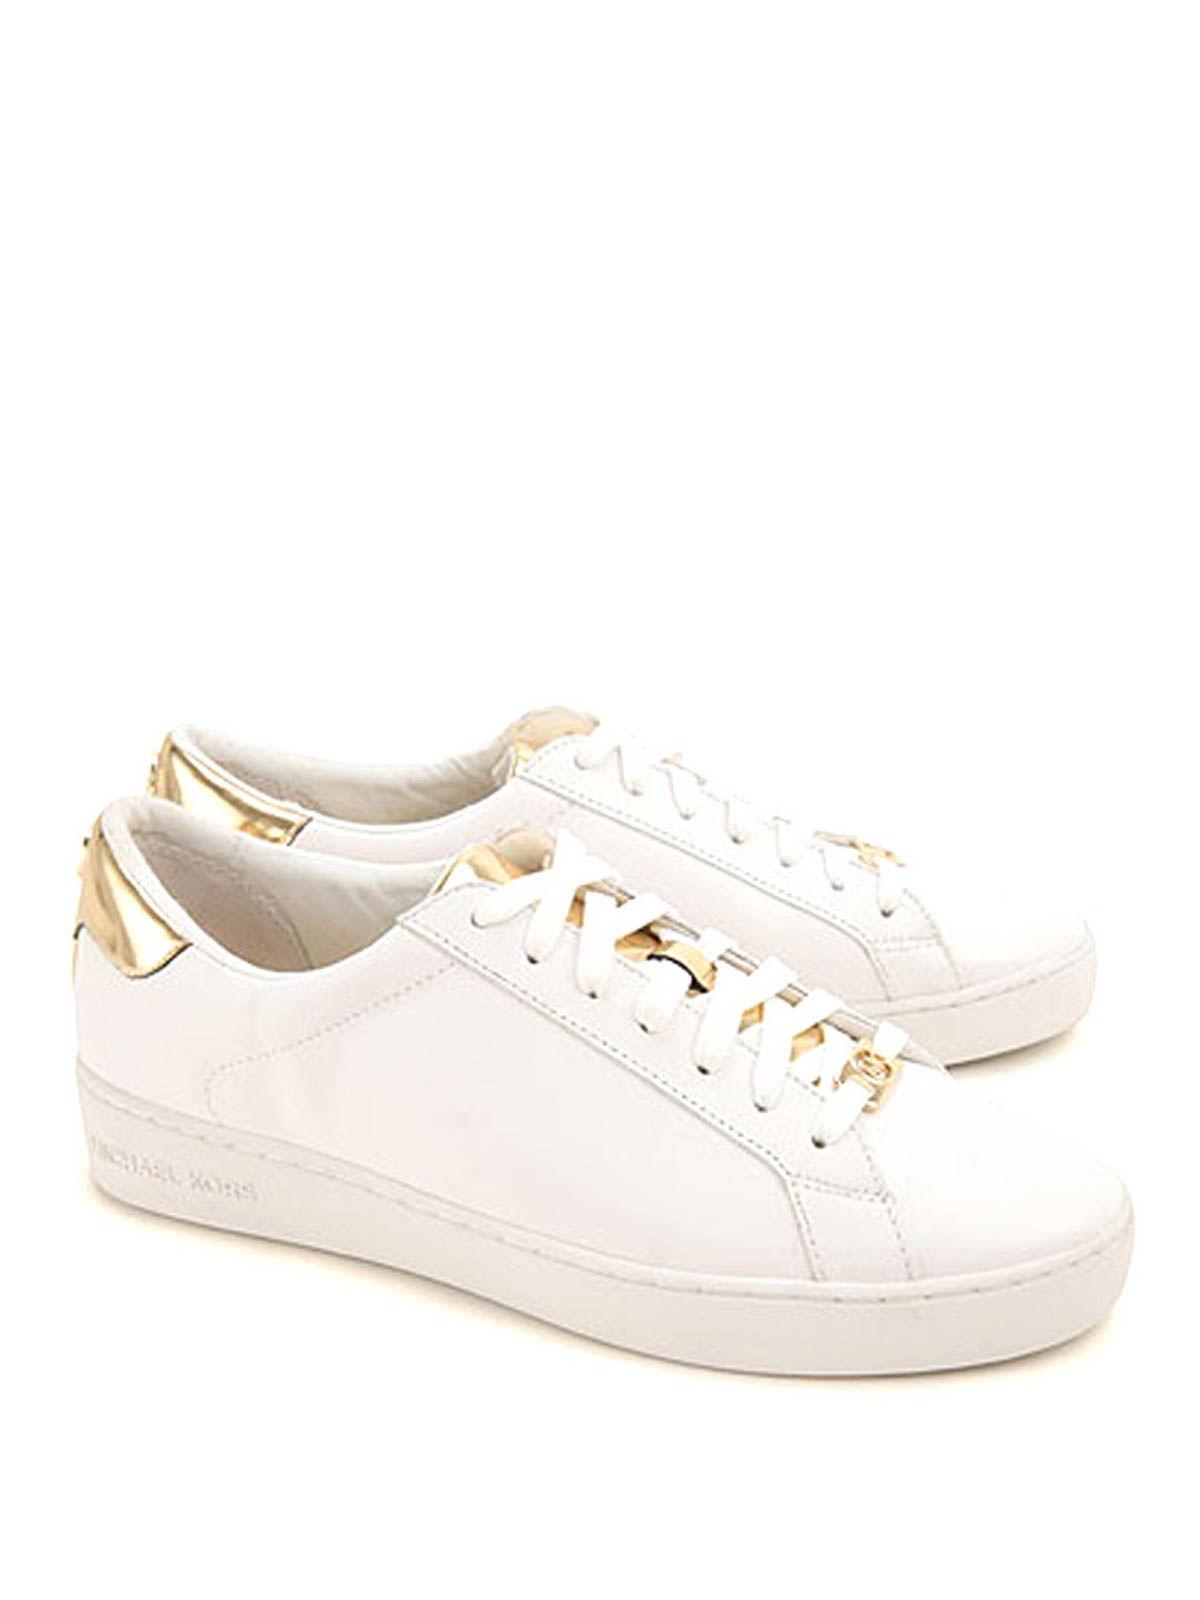 Trainers Michael Kors - Irving leather sneakers - 43S5IRFS2L751